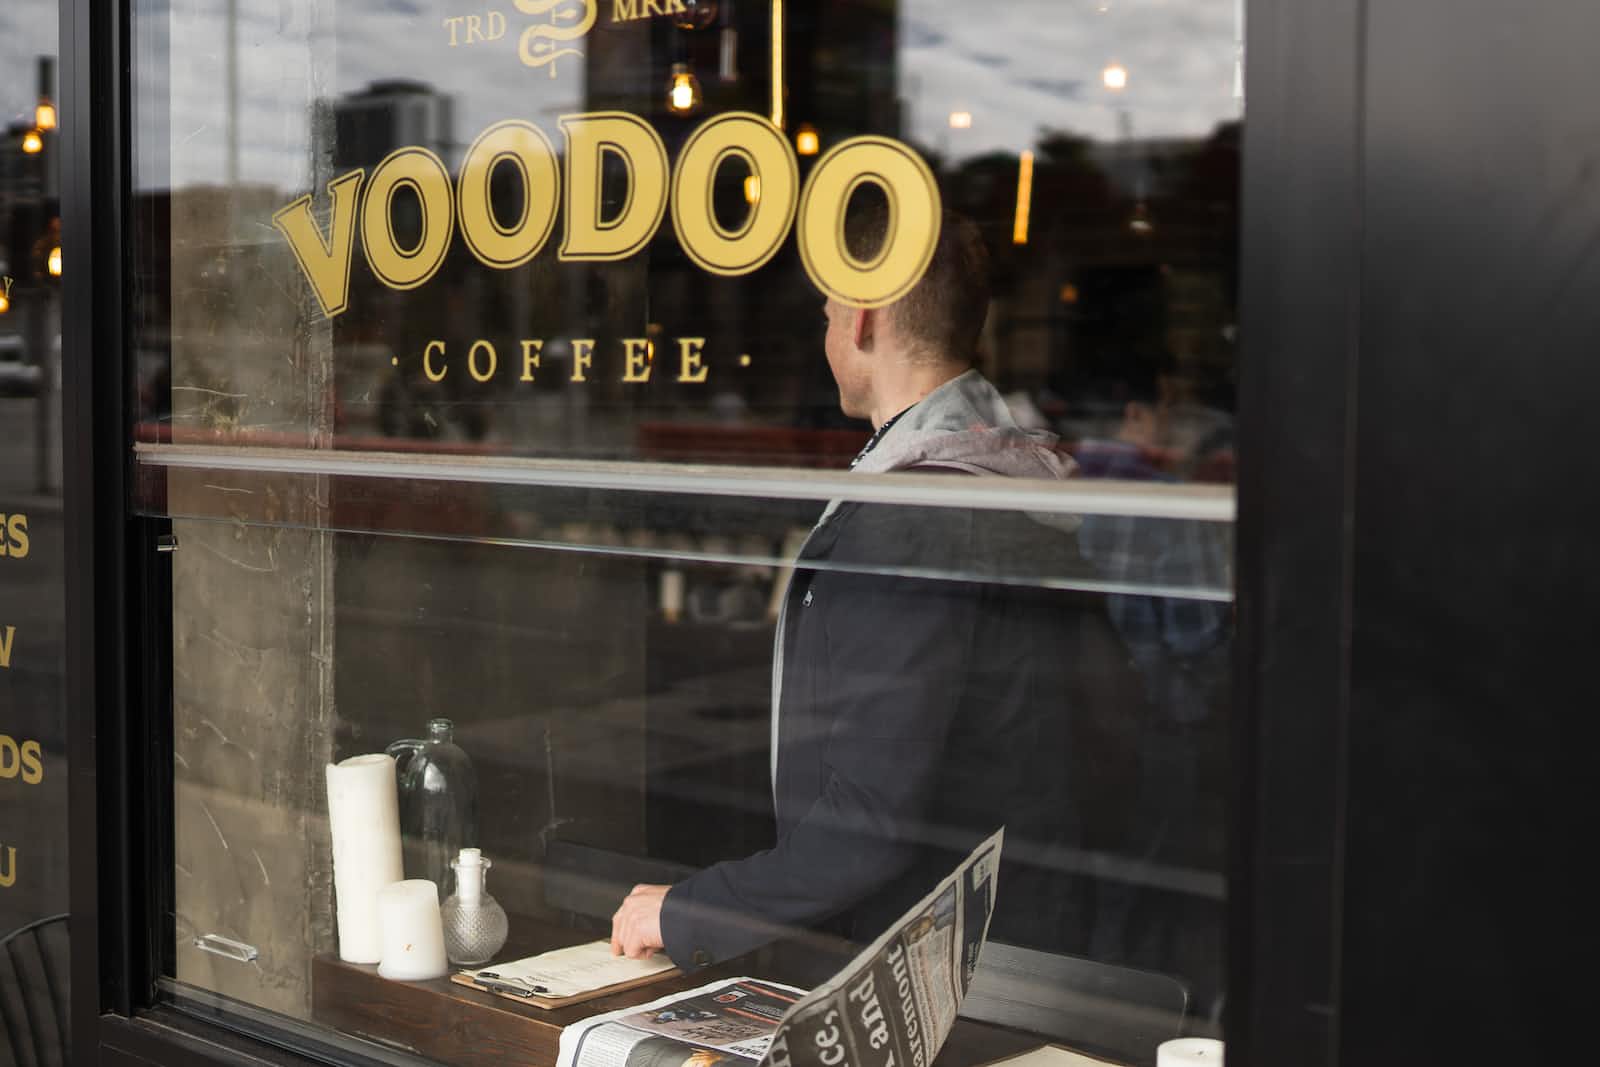 A shopfront window with the trademark name Voodoo Coffee in gold lettering